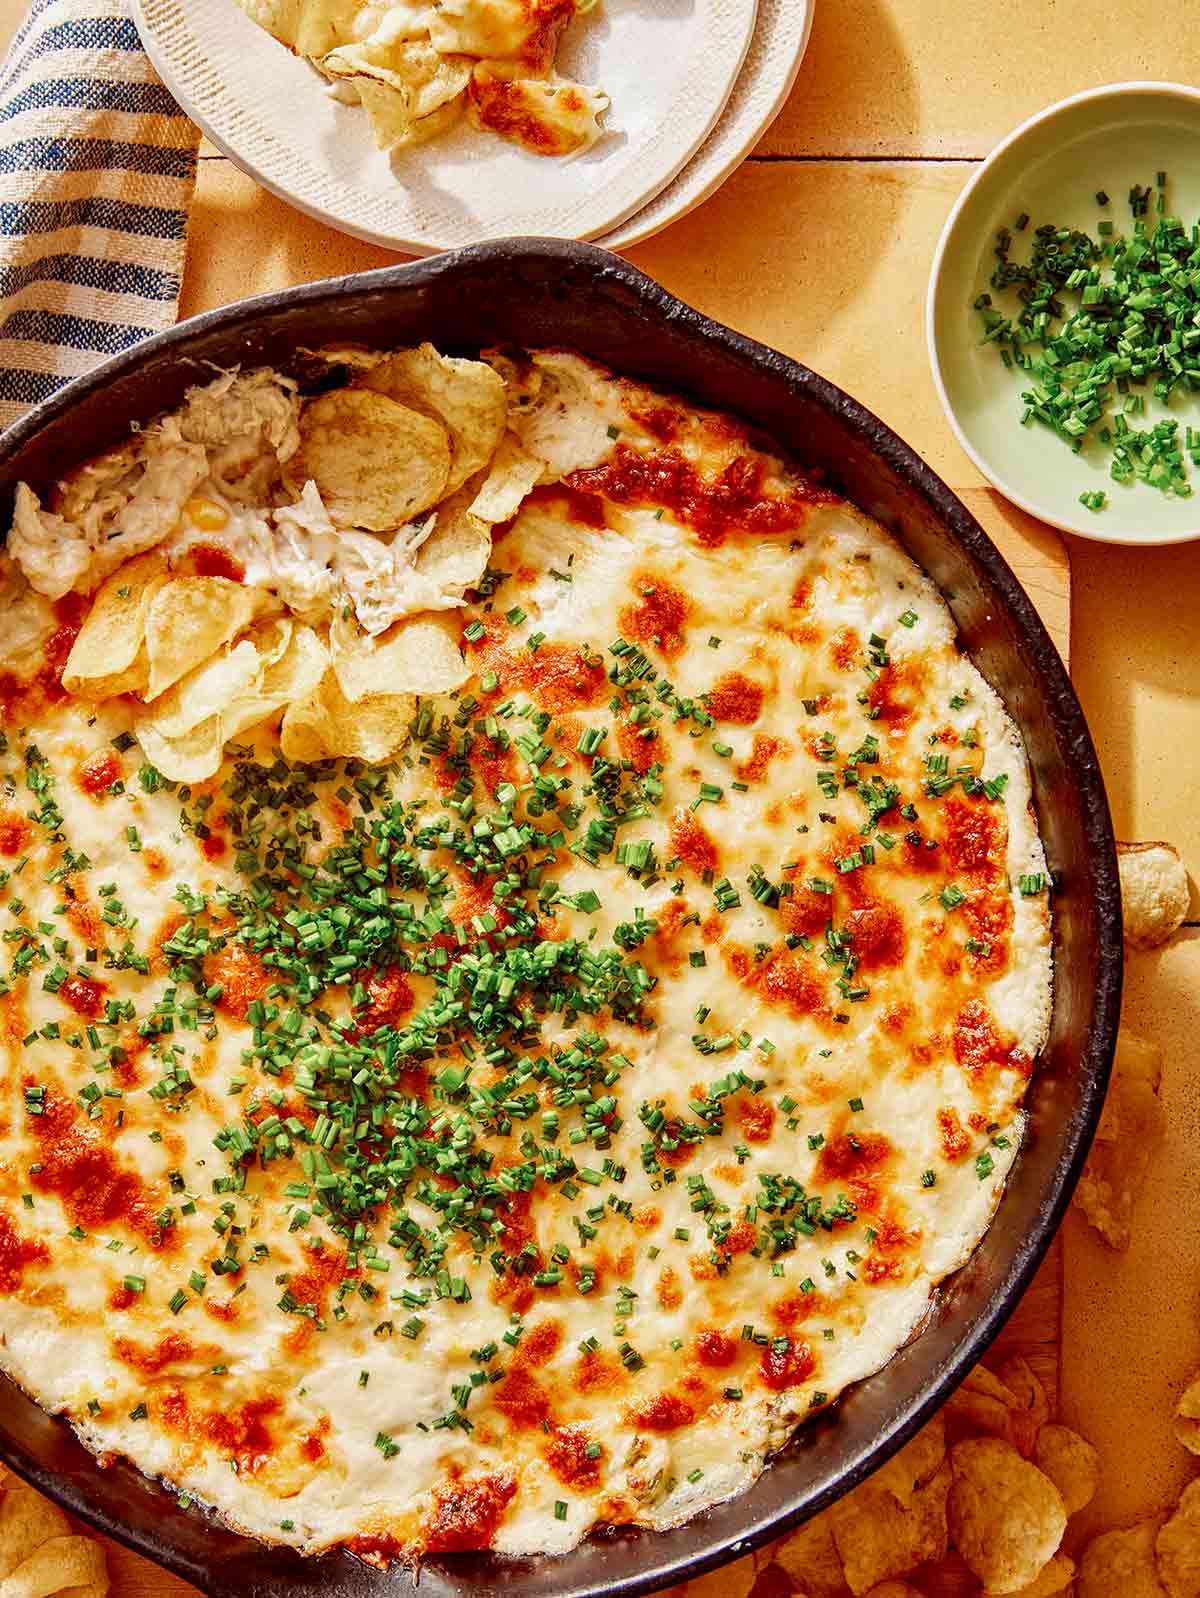 Crab dip recipe in a skillet with potato chips on the side.